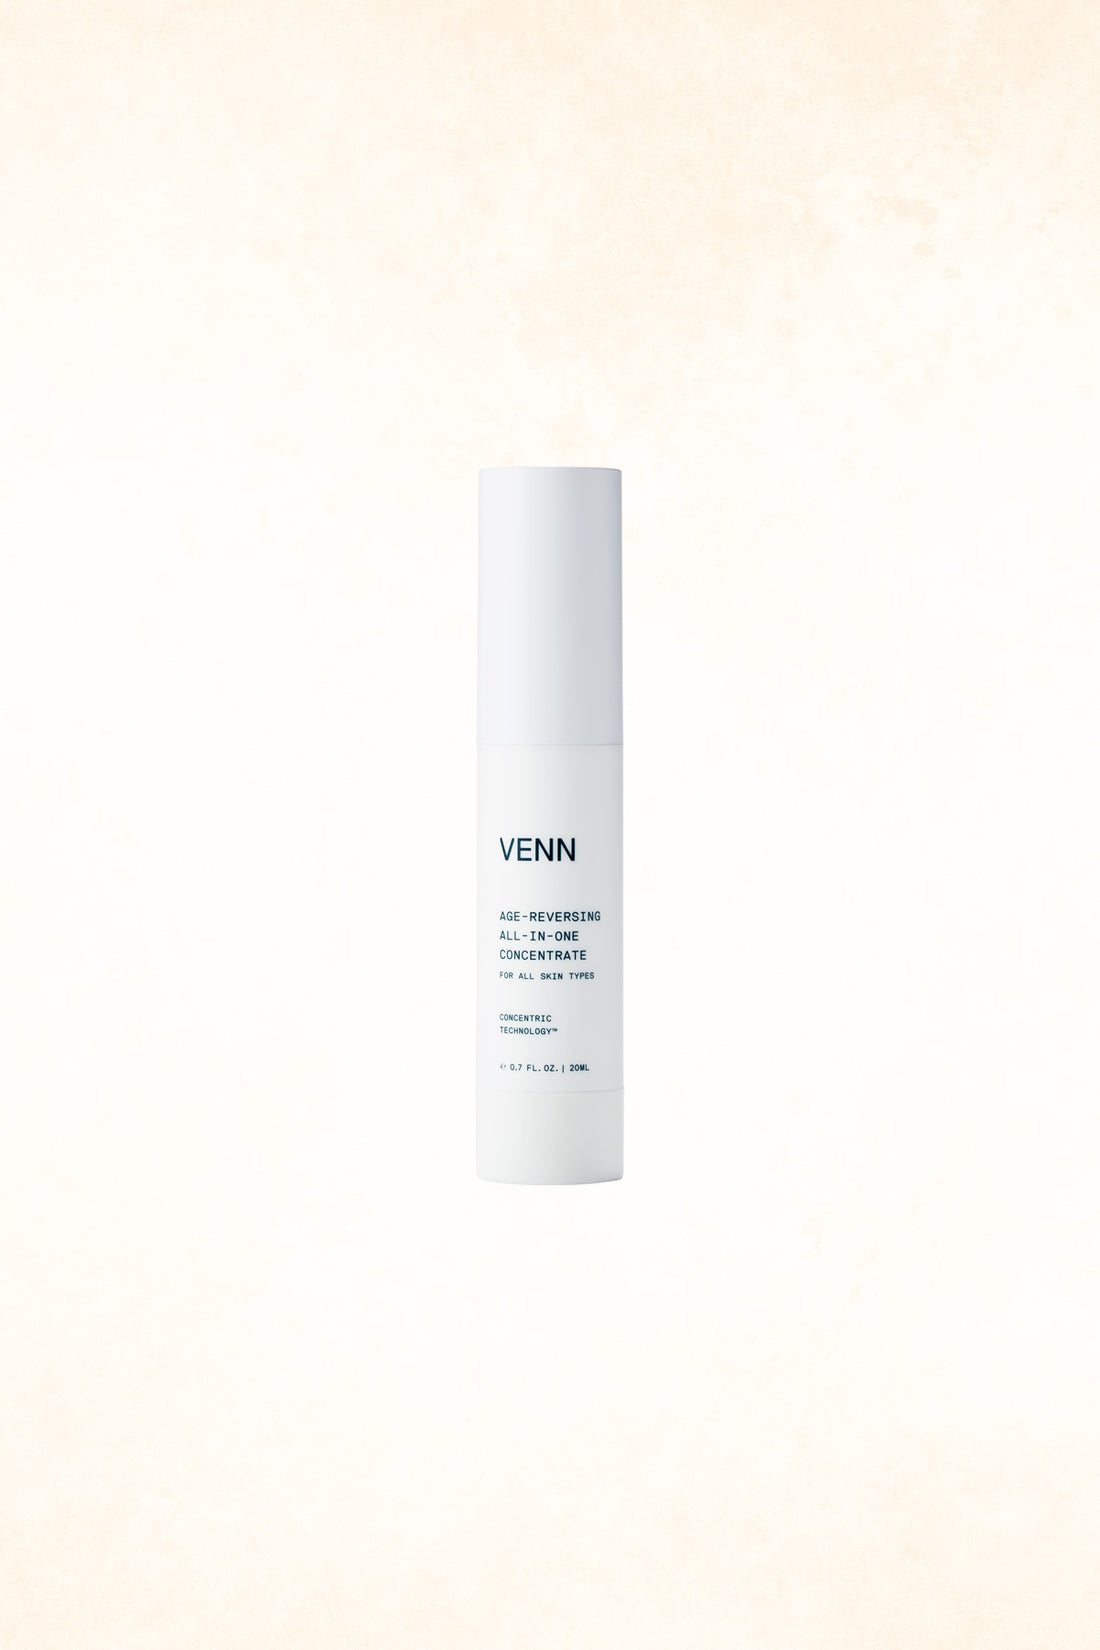 Venn - Age-Reversing All-In-One-Concentrate - 20 ml